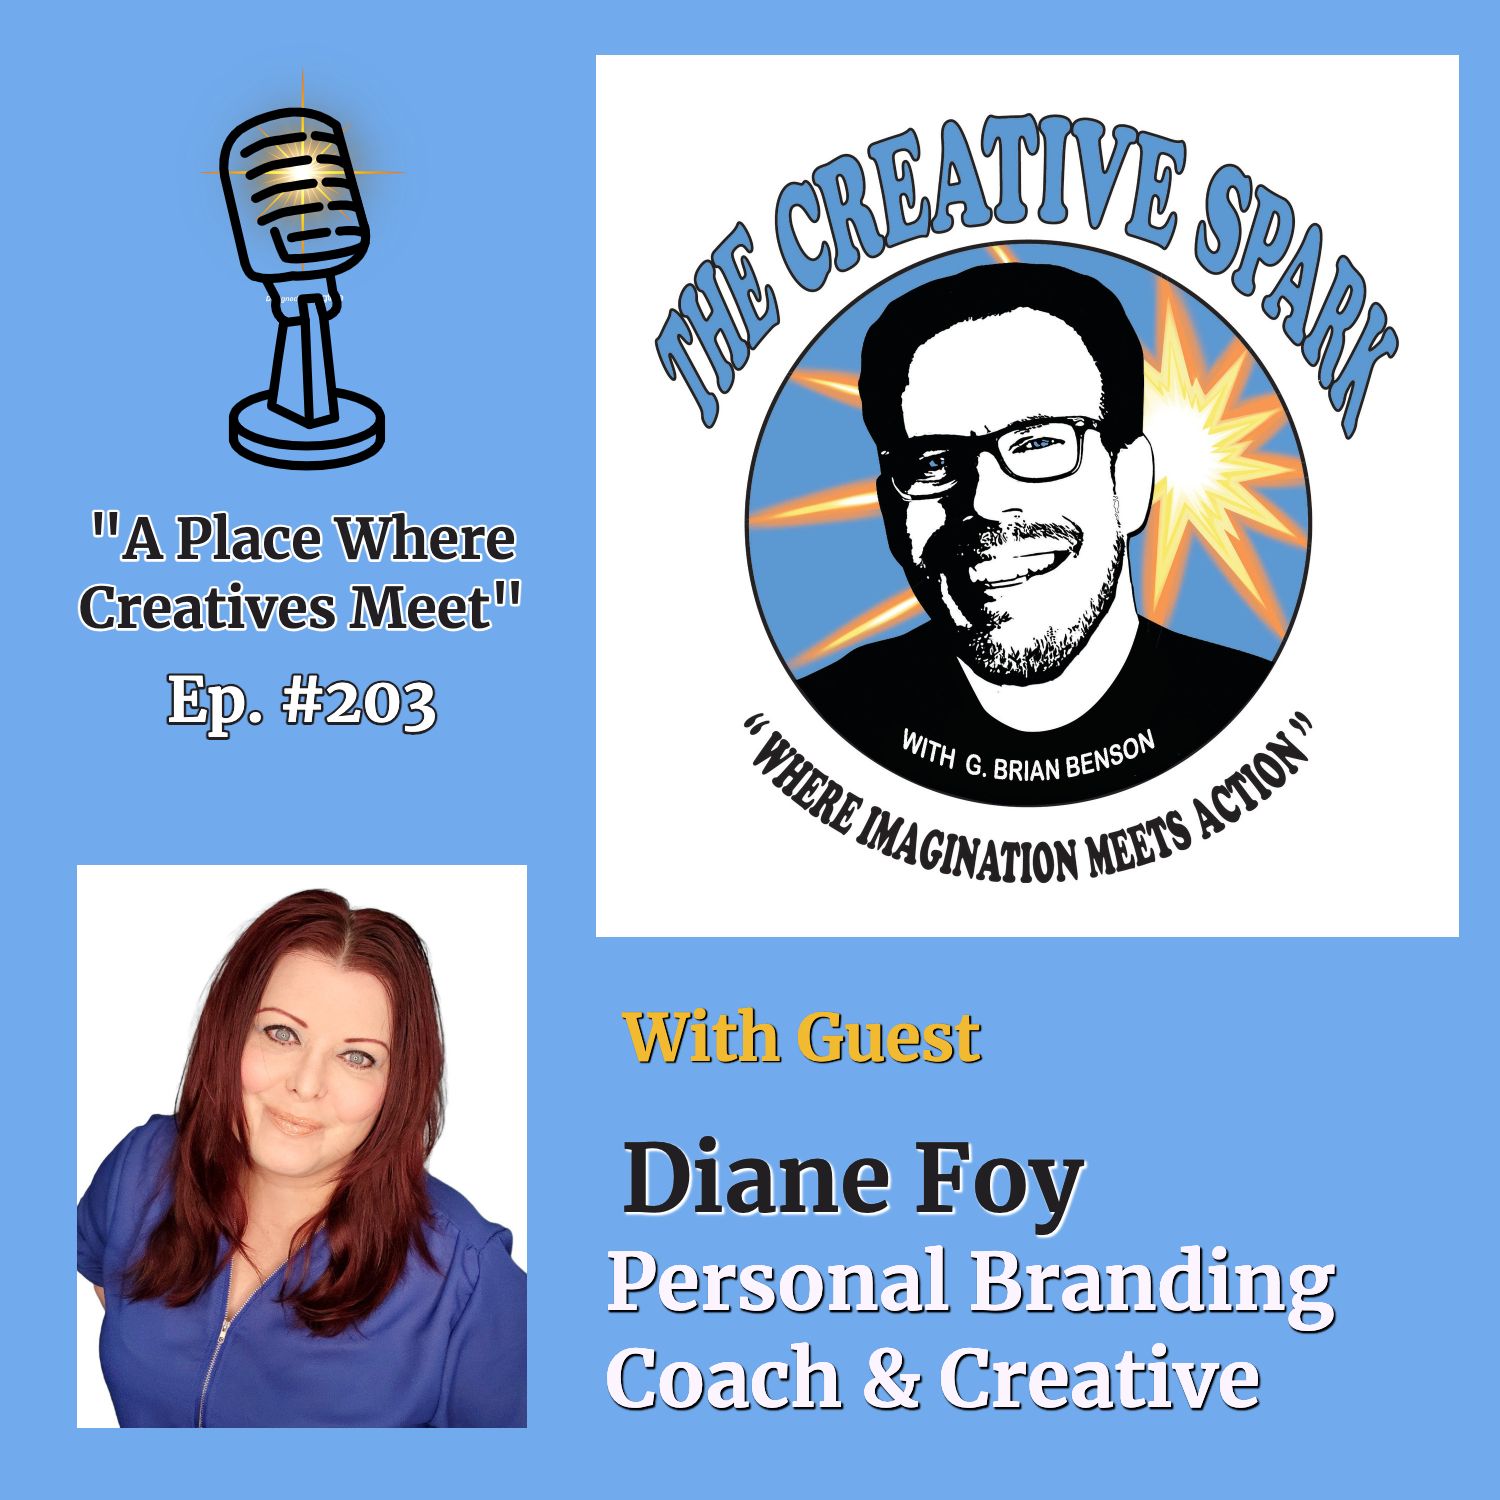 S2 Ep203: The Creative Spark Ep. 203 with Guest Diane Foy